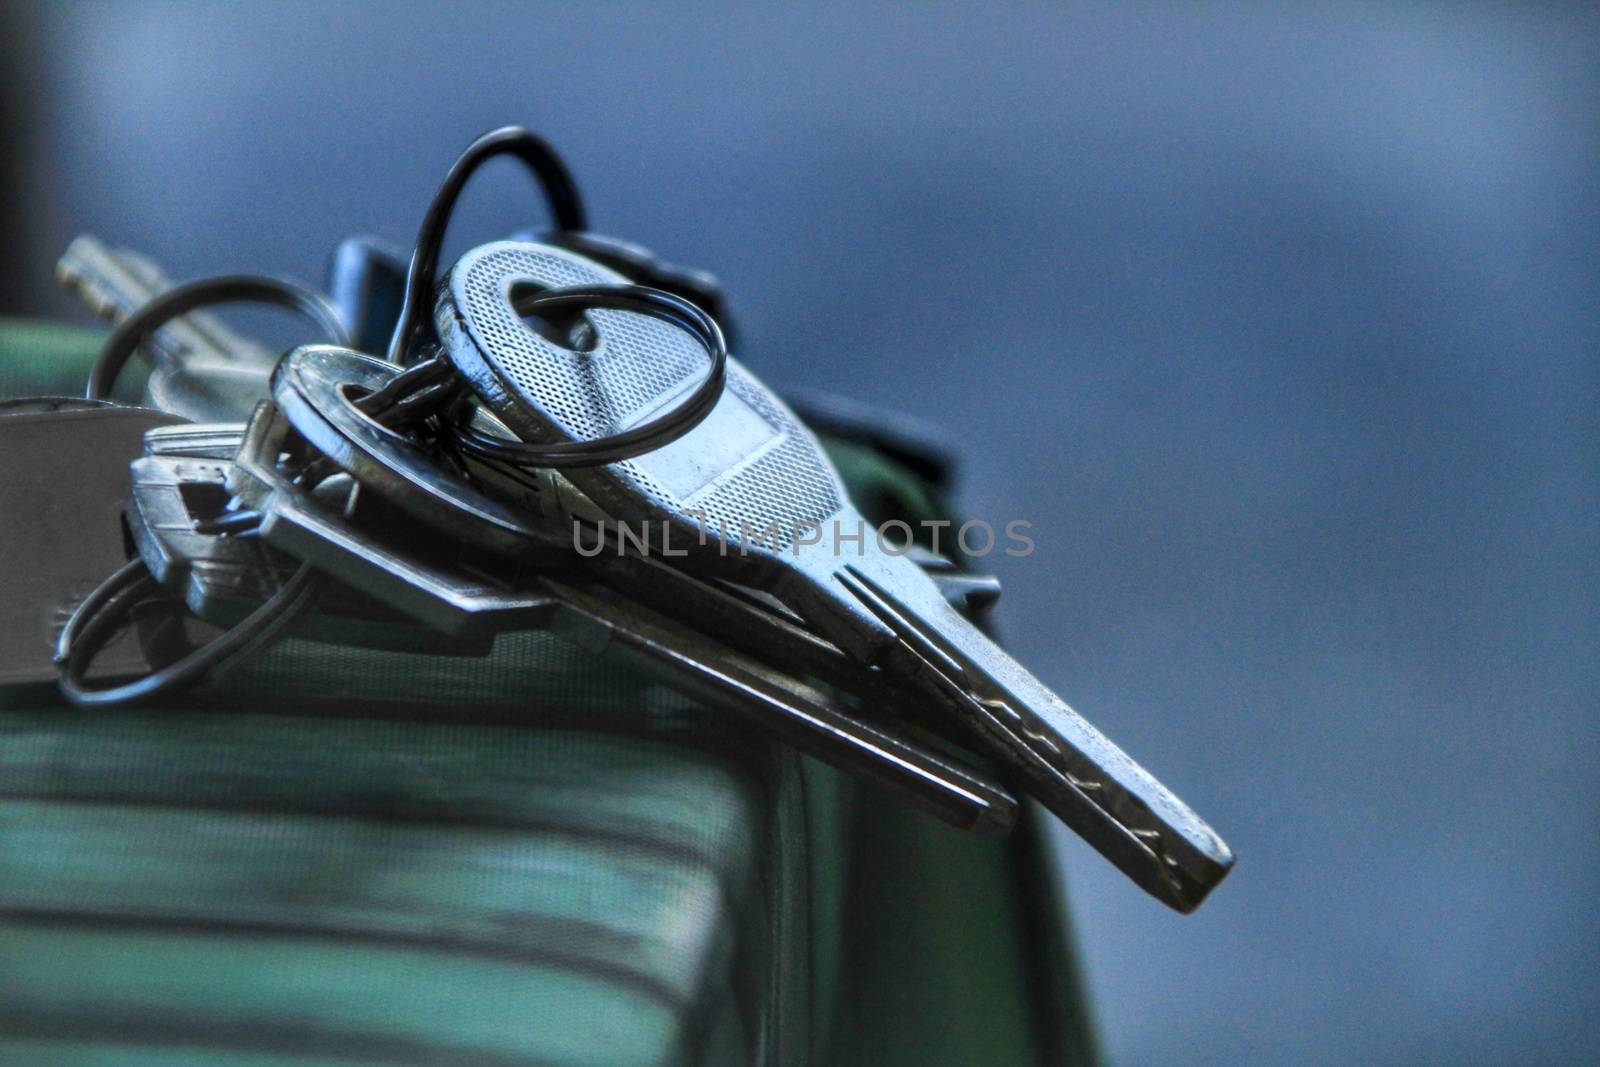 Bunch of keys on the table with green tablecloth